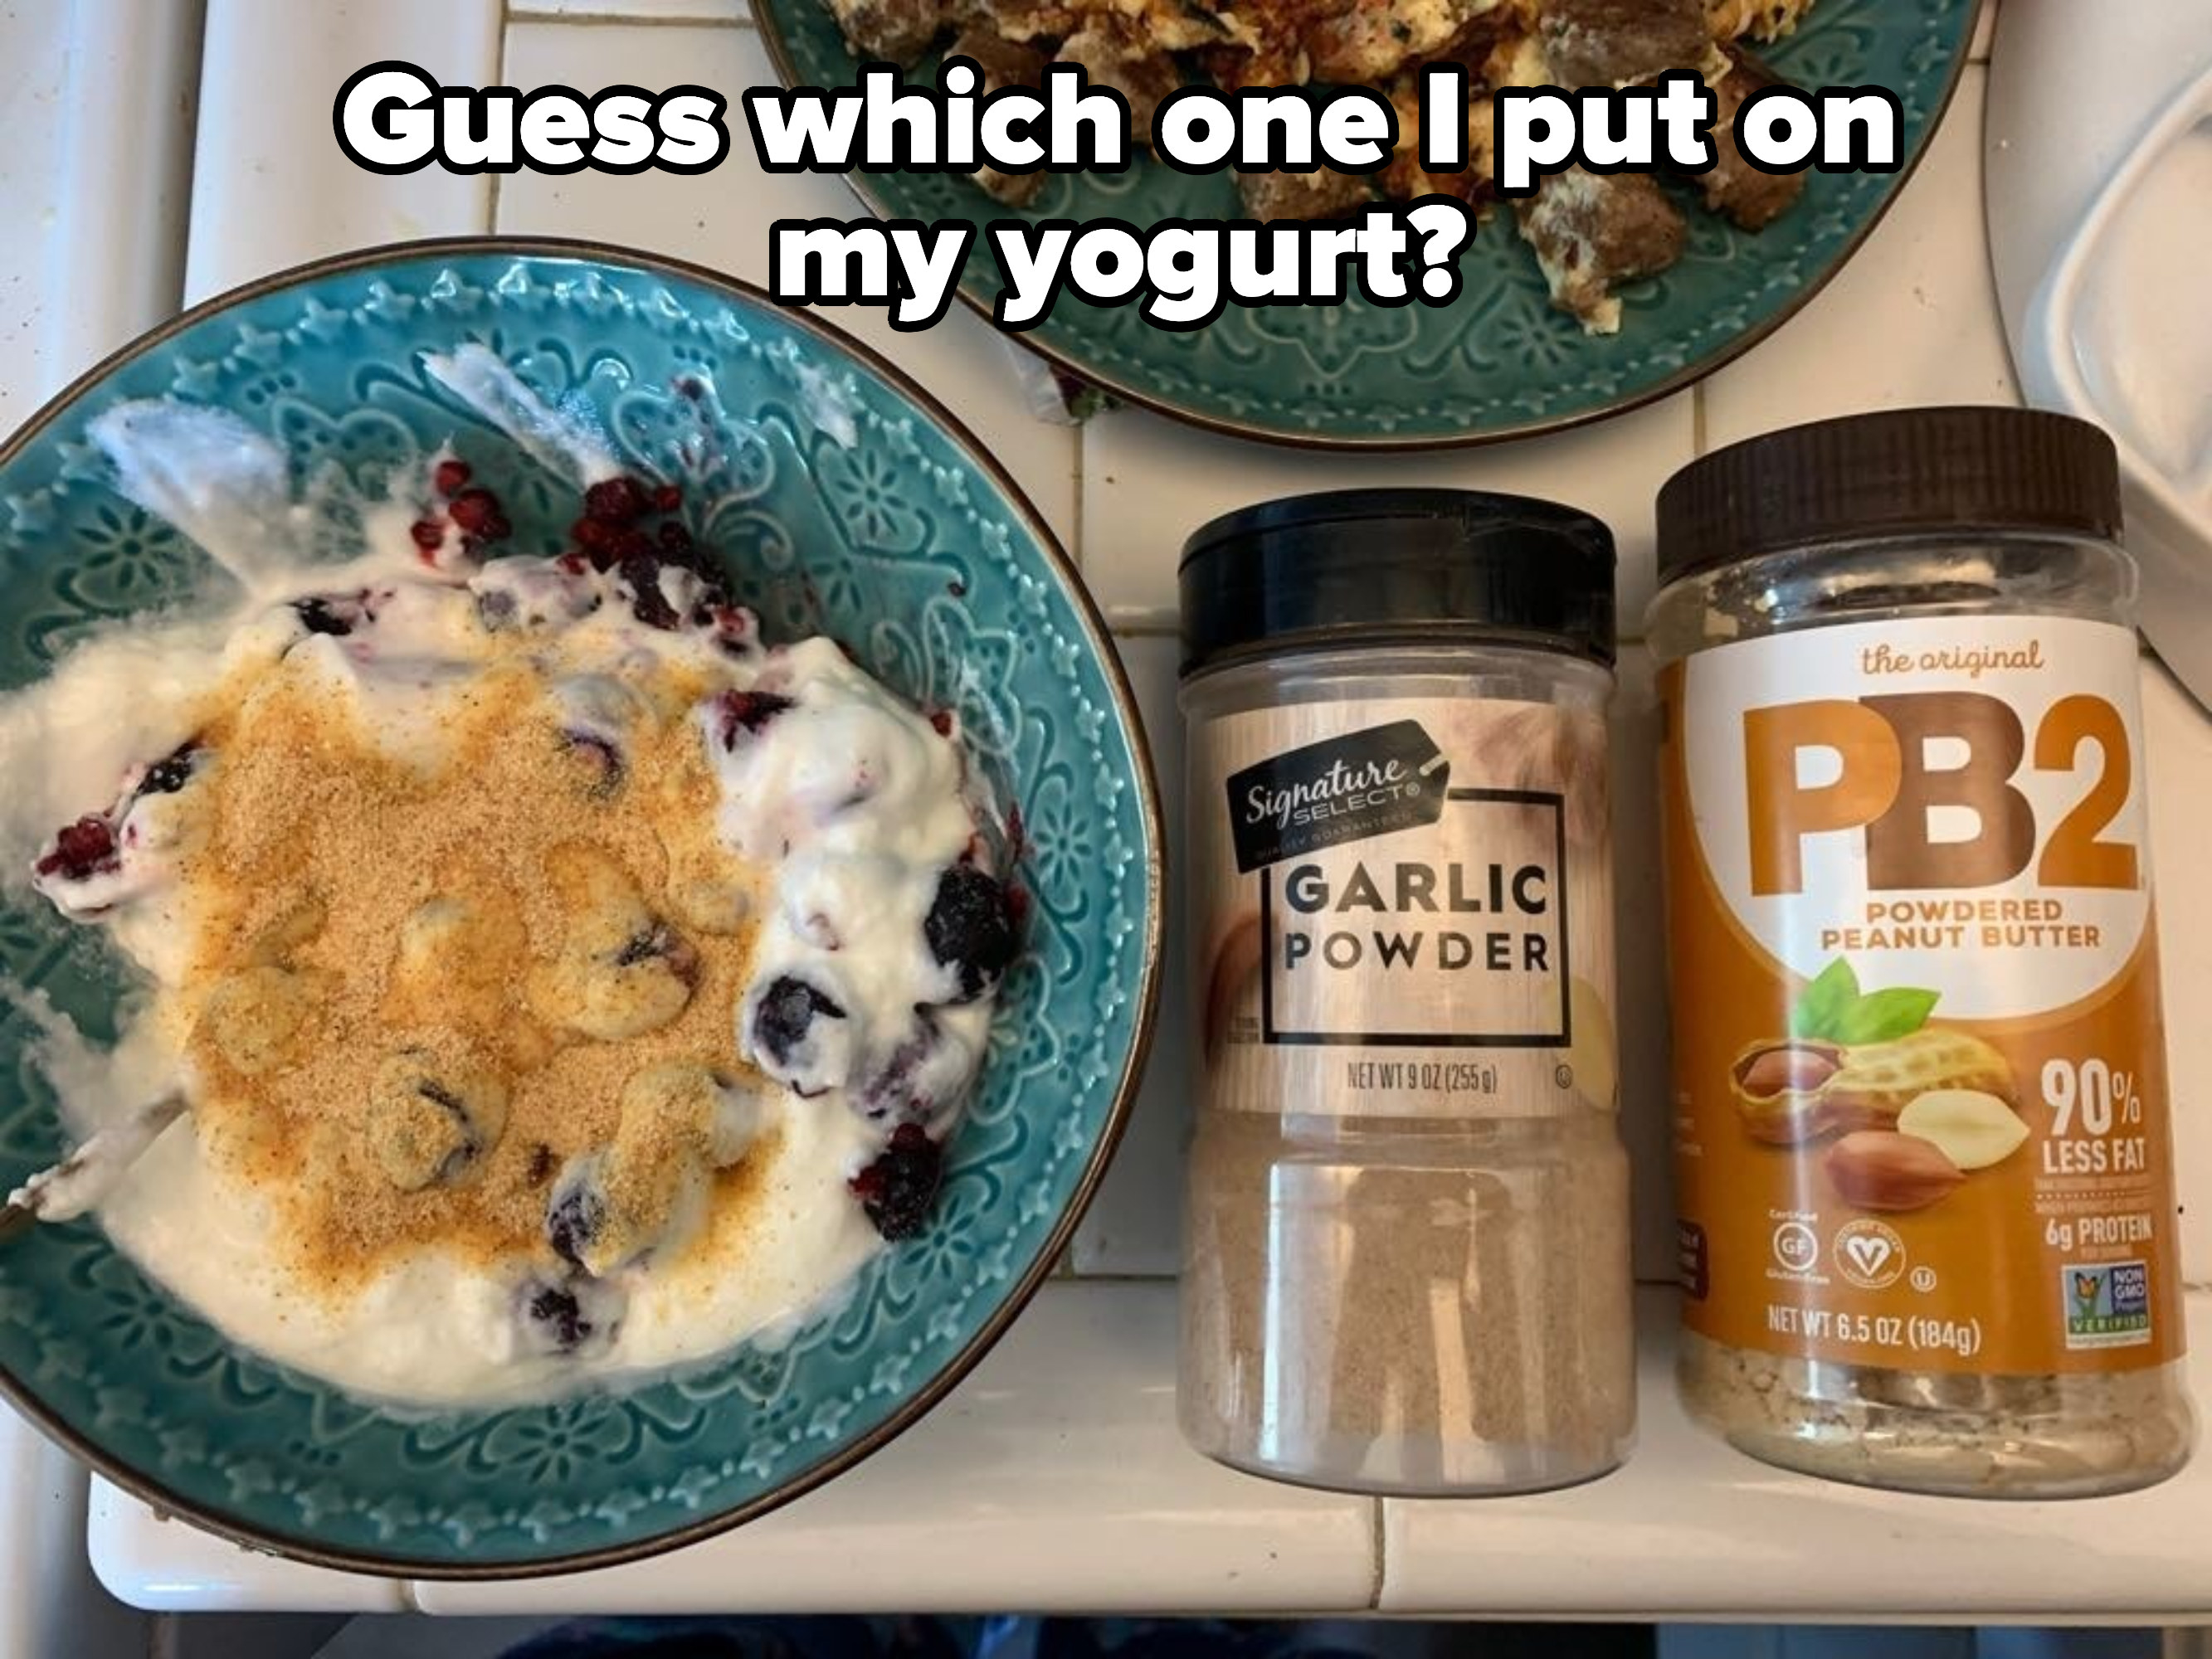 Person who accidentally put garlic powder in their yogurt because it looked like peanut butter powder